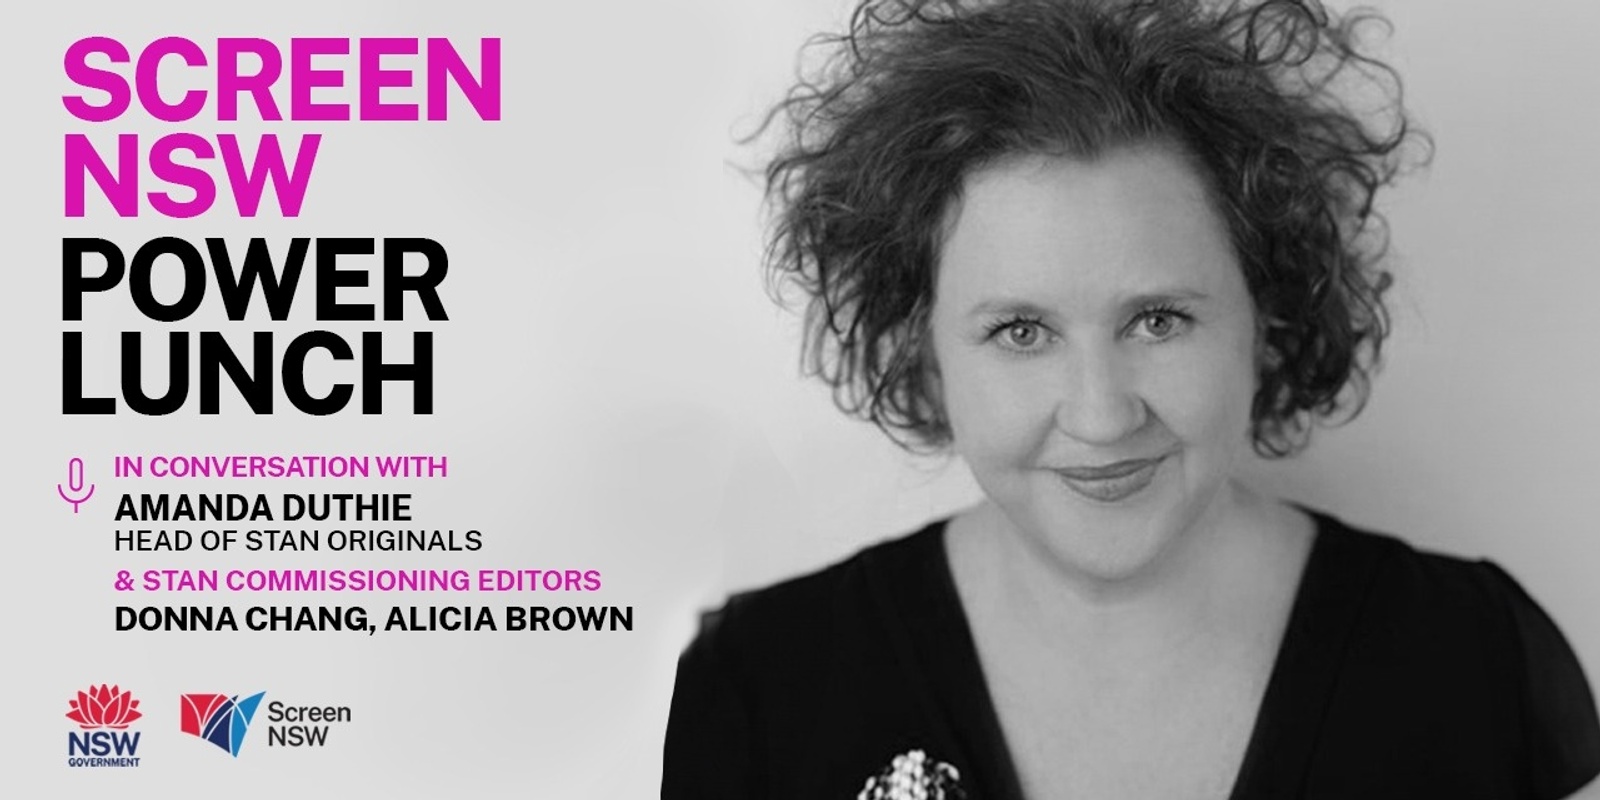 Banner image for Screen NSW Power Lunch webinar: With Amanda Duthie, Donna Chang and Alicia Brown of Stan Originals